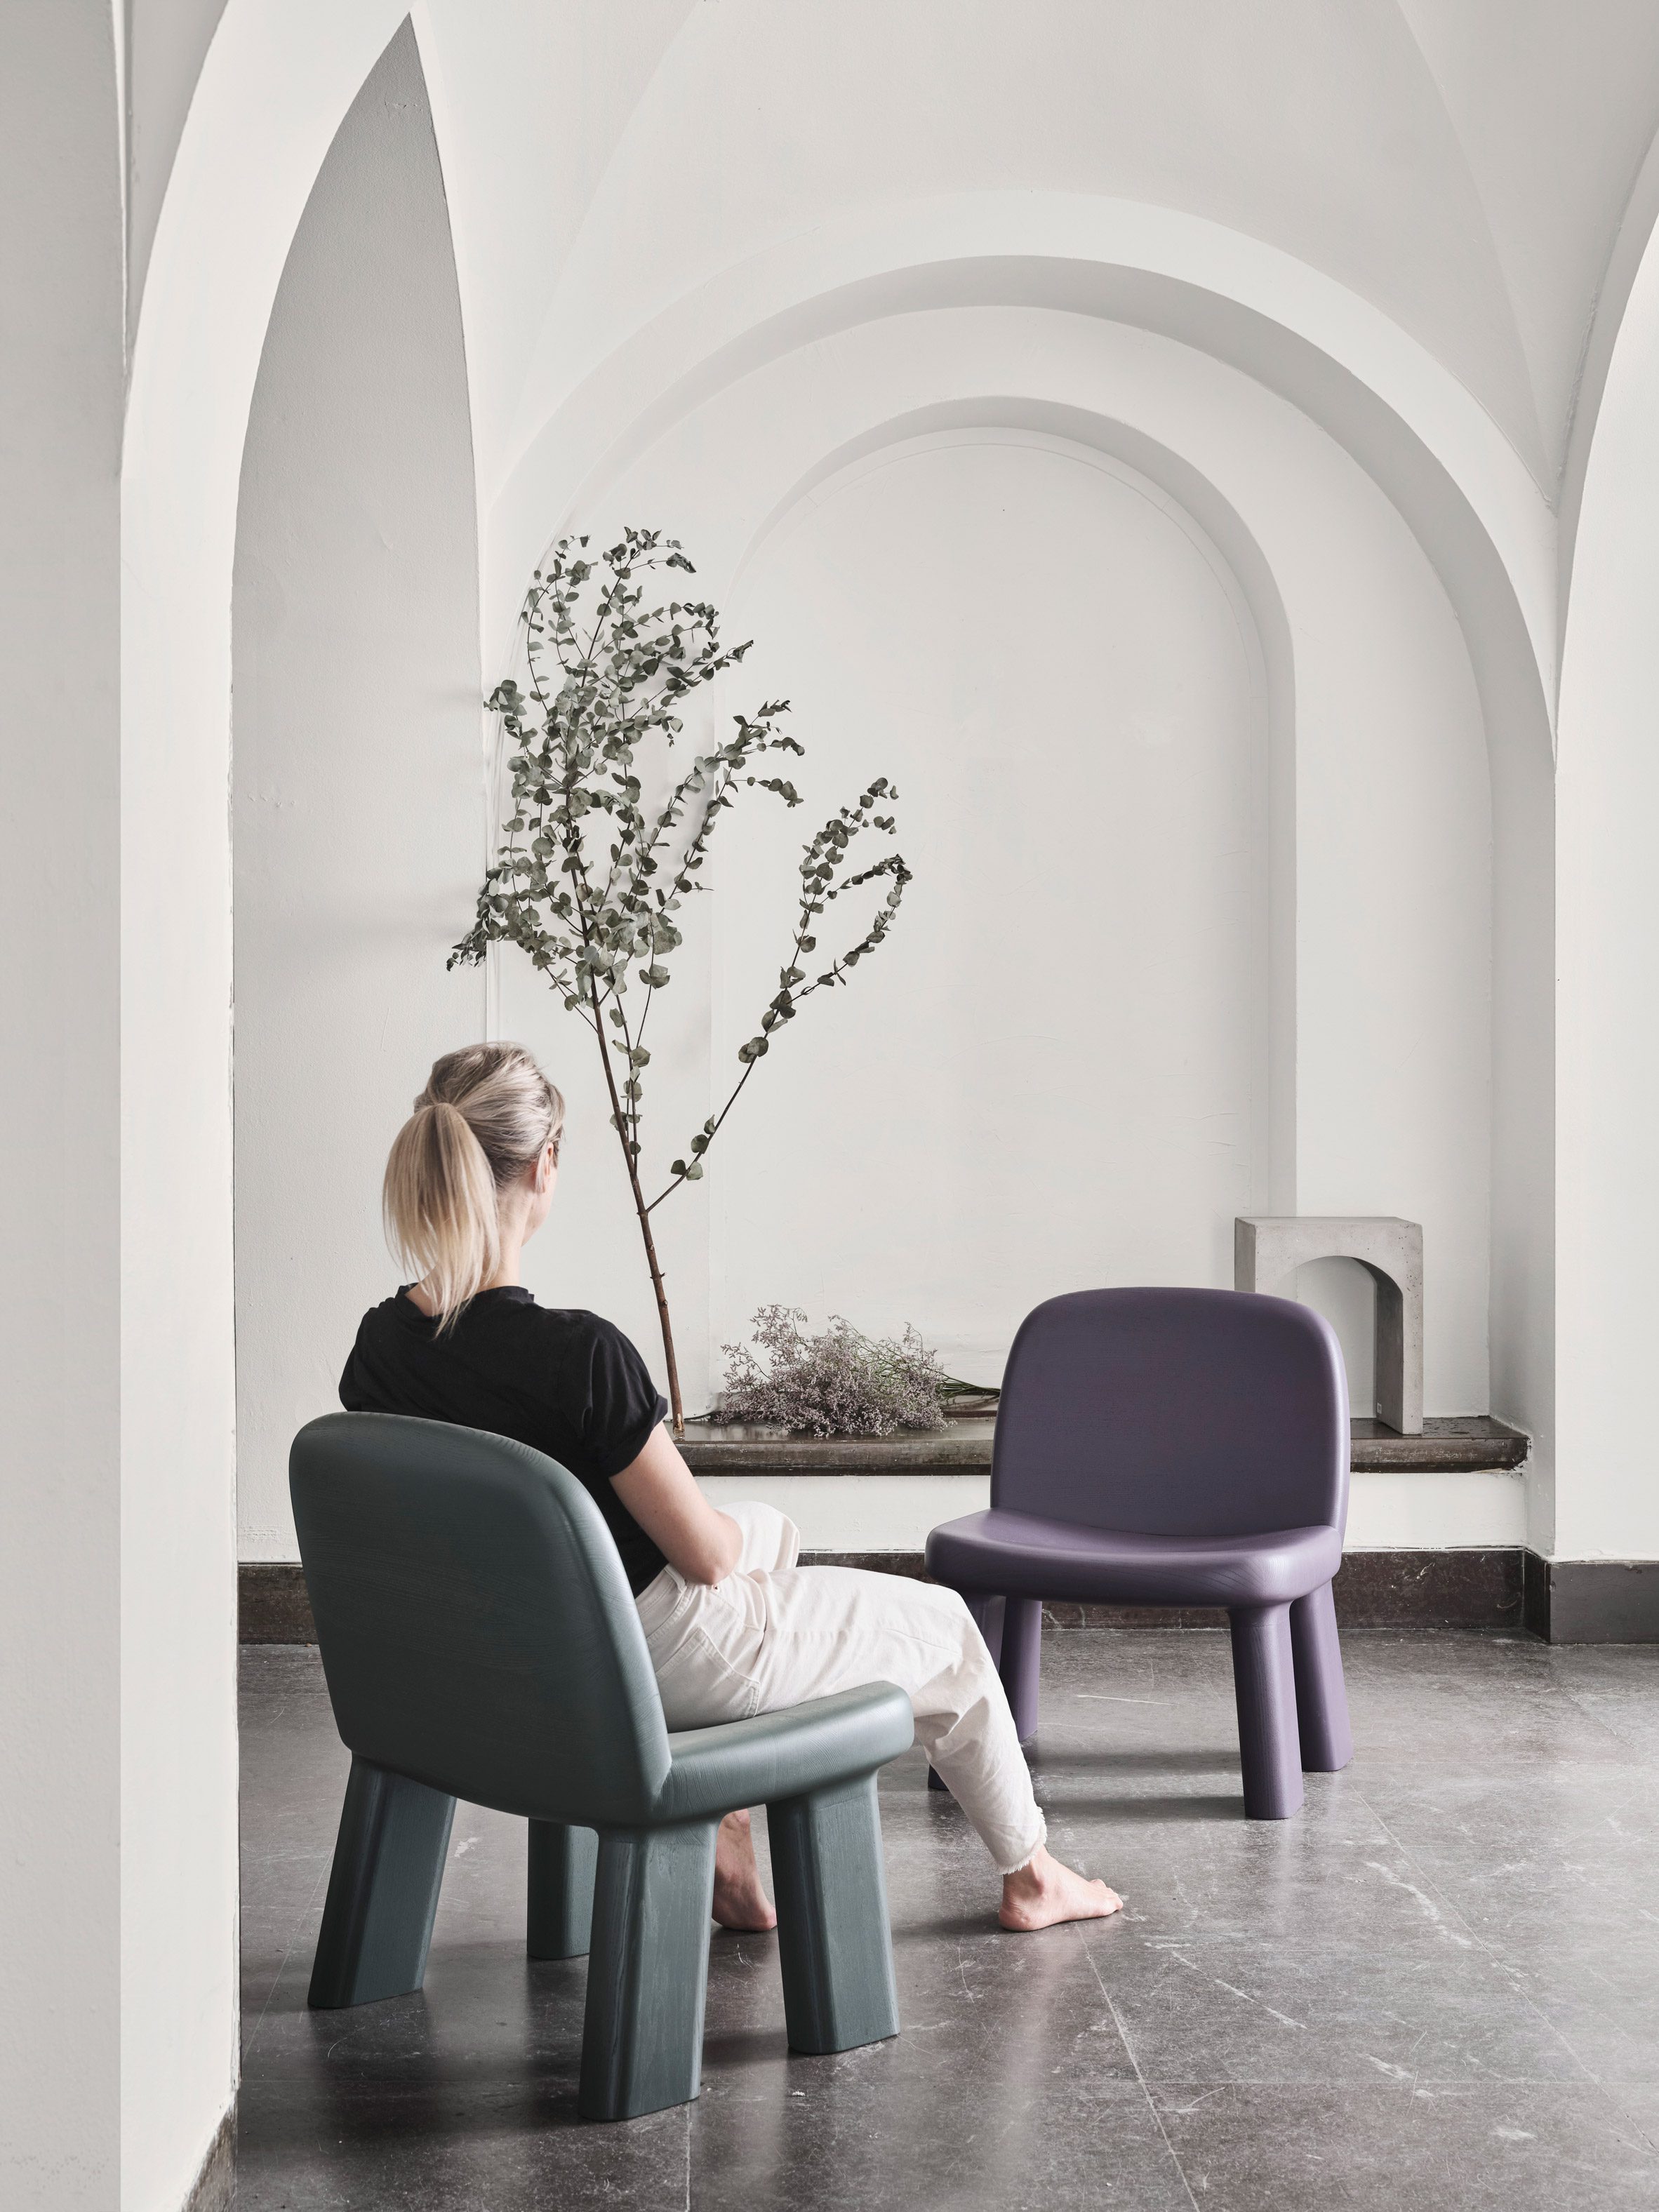 Maximus armchair by Johan Ansander for Bla Station in green and purple finishes